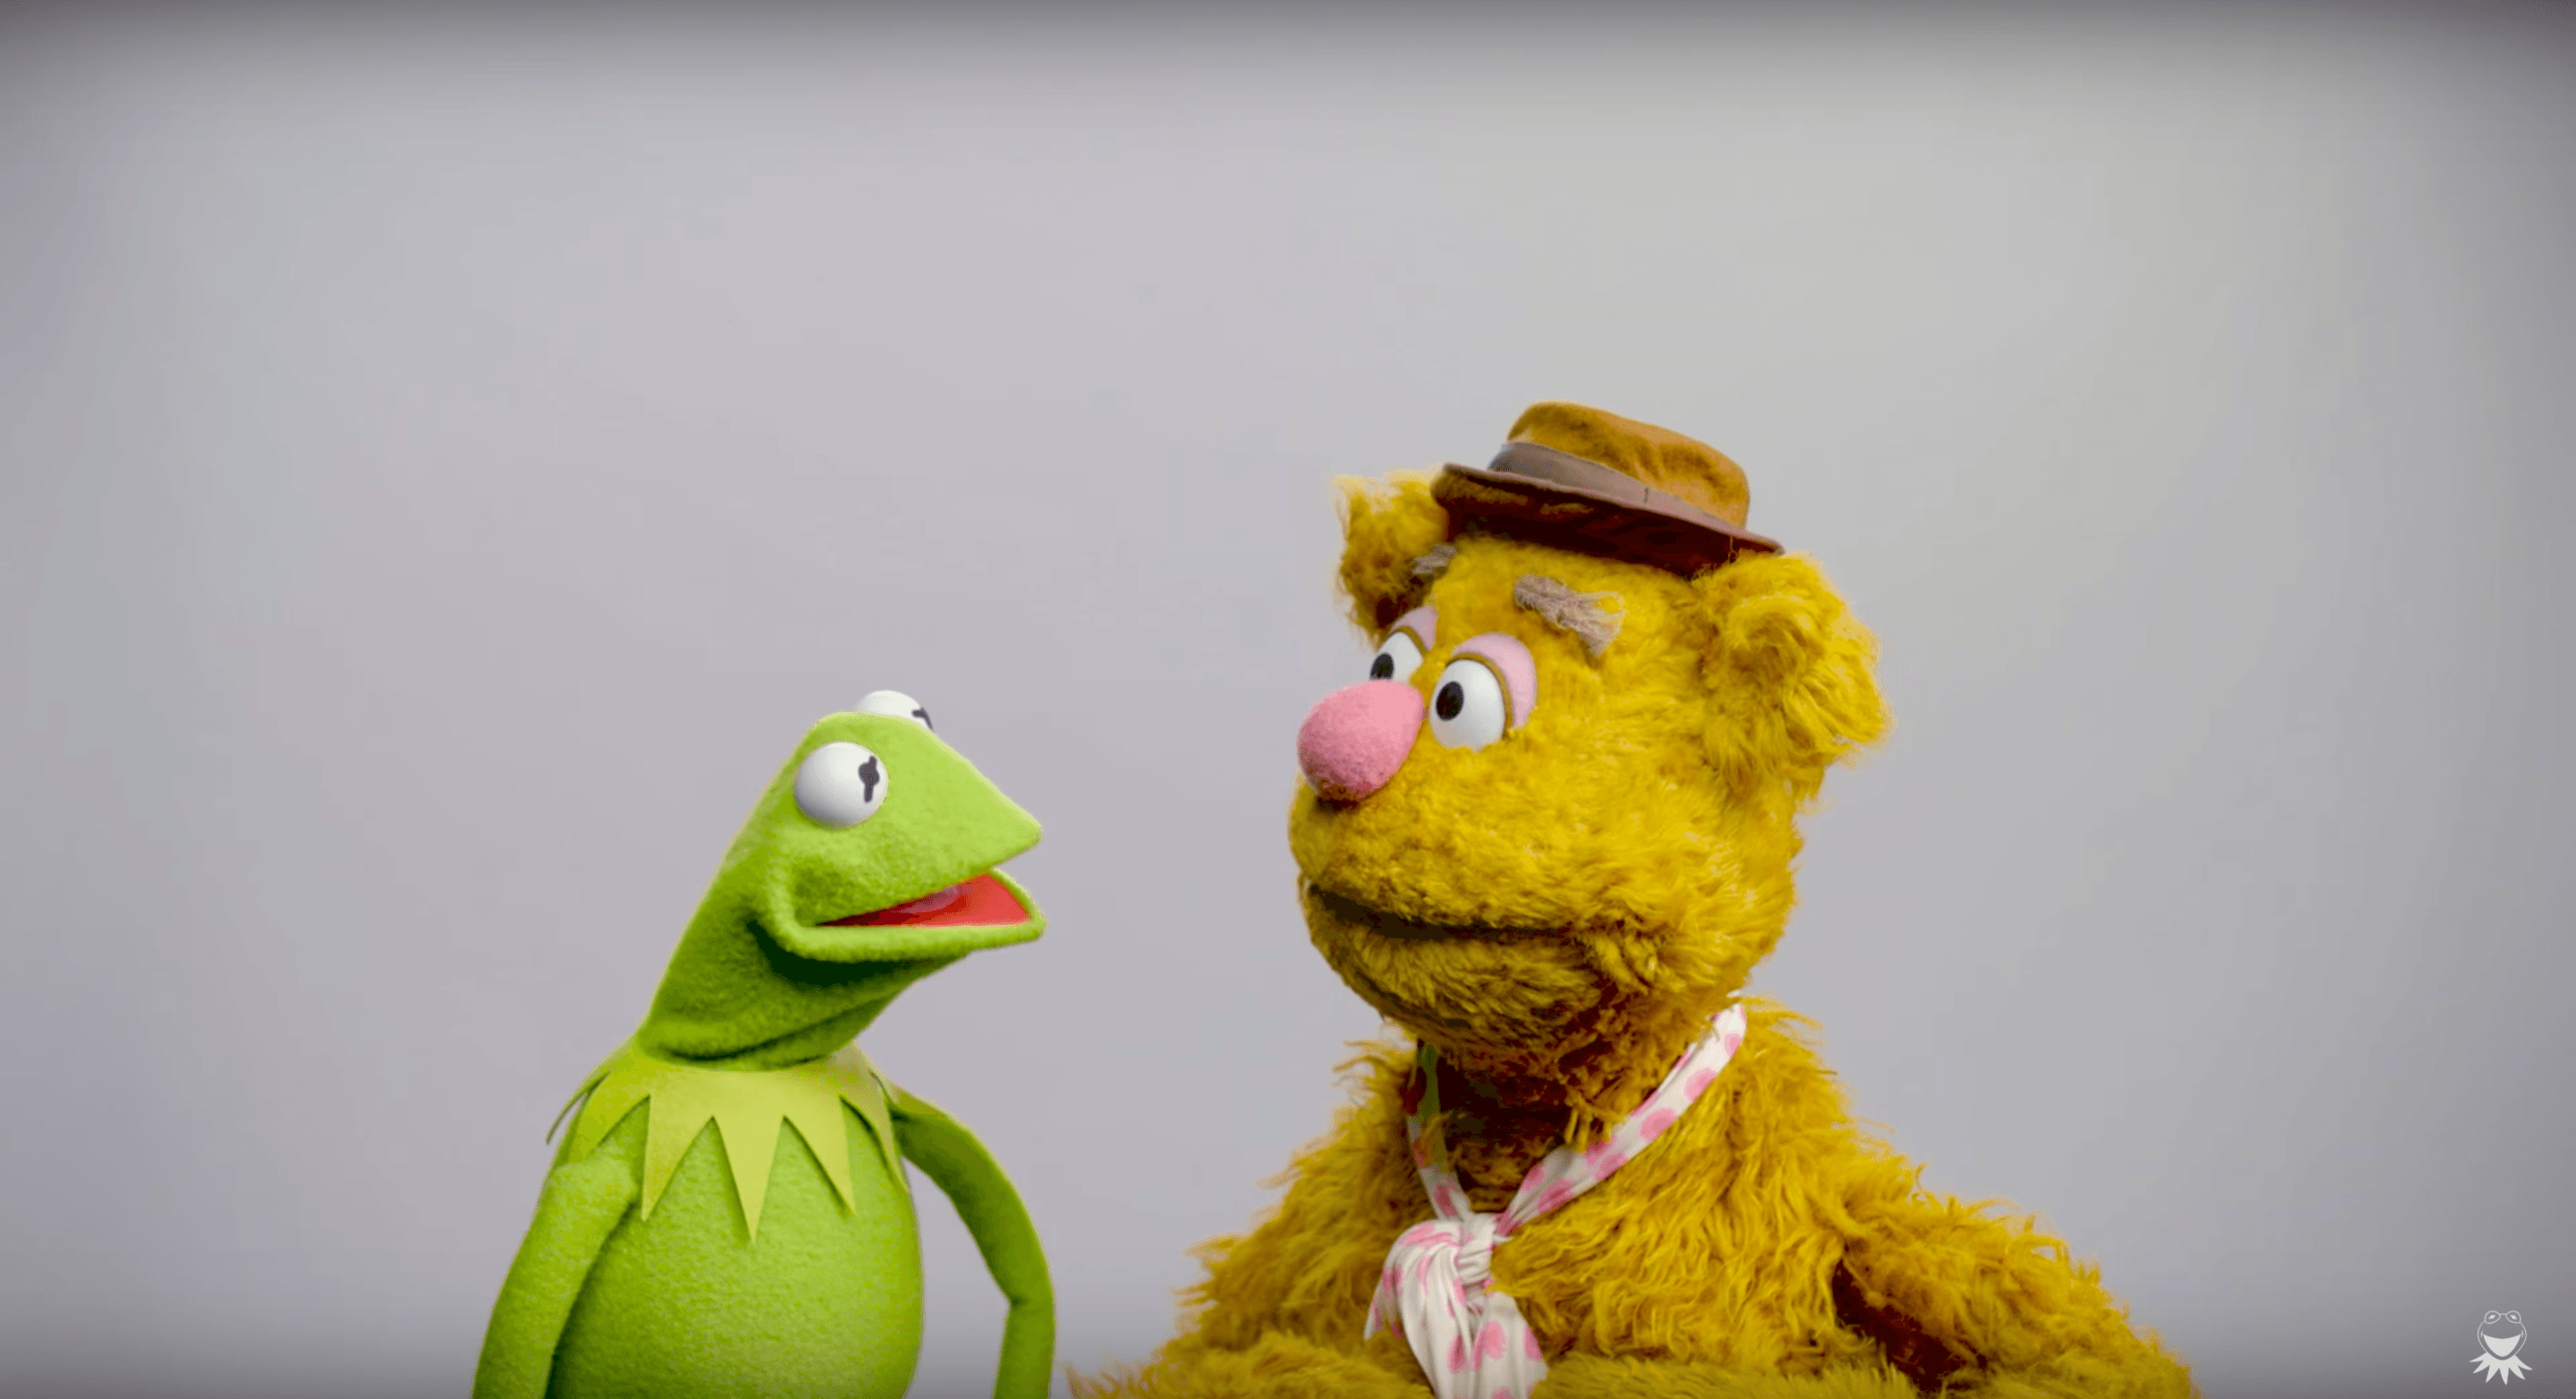 New Muppet Thought of the Week Puts Kermit the Frog and Fozzie Bear Back Together